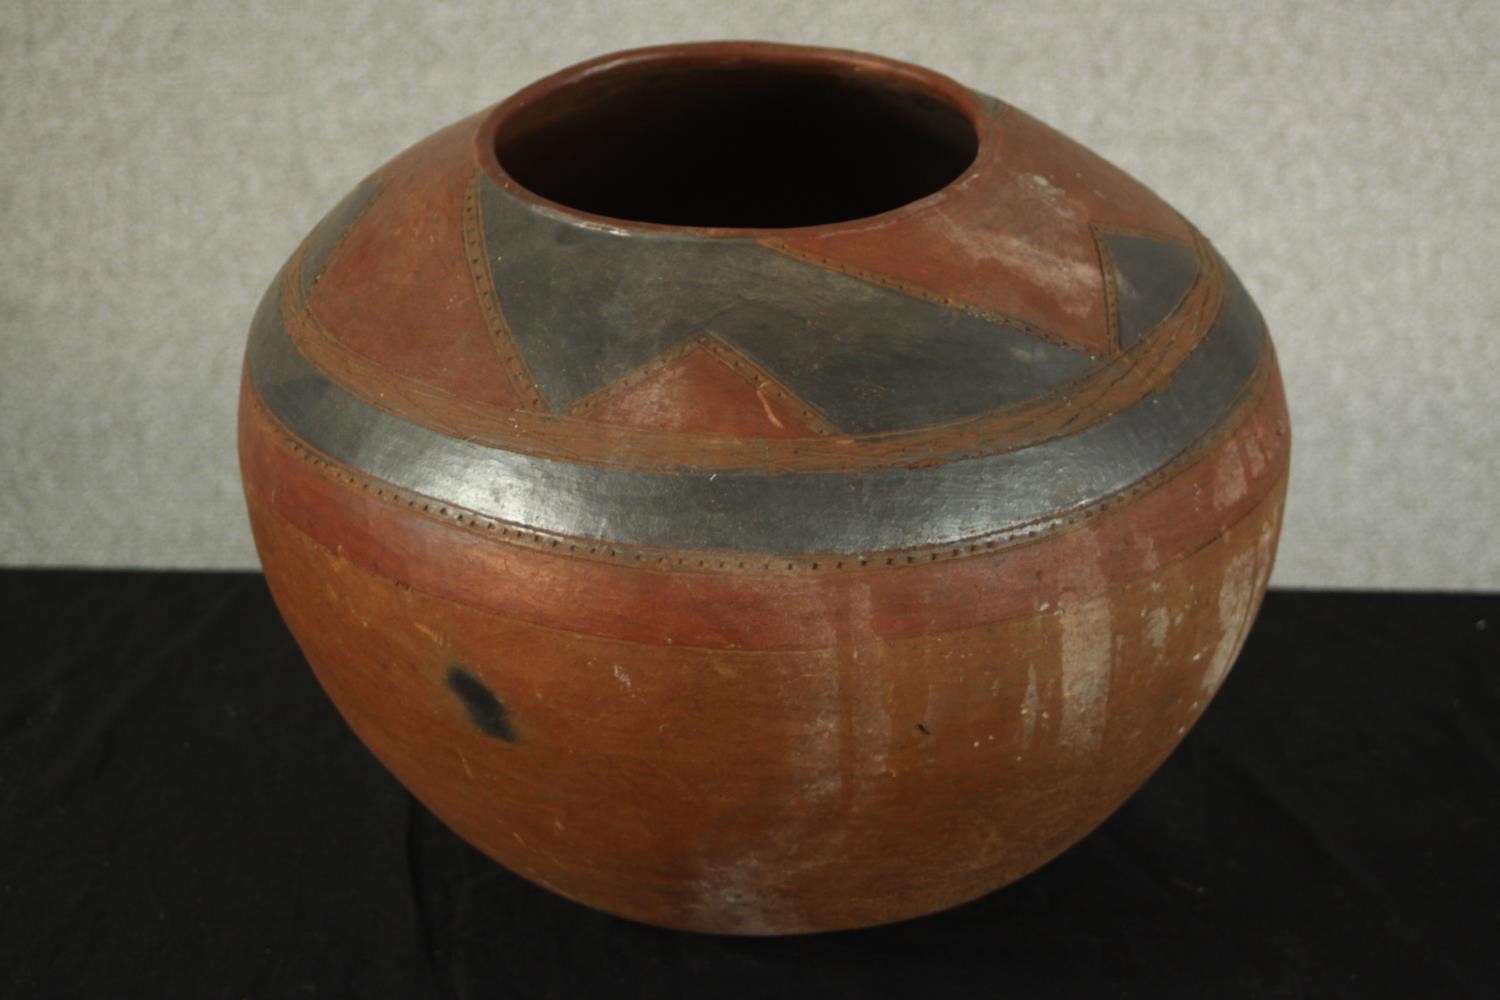 A pre-Columbian style painted pottery globular vessel pot/vase with grey painted geometric